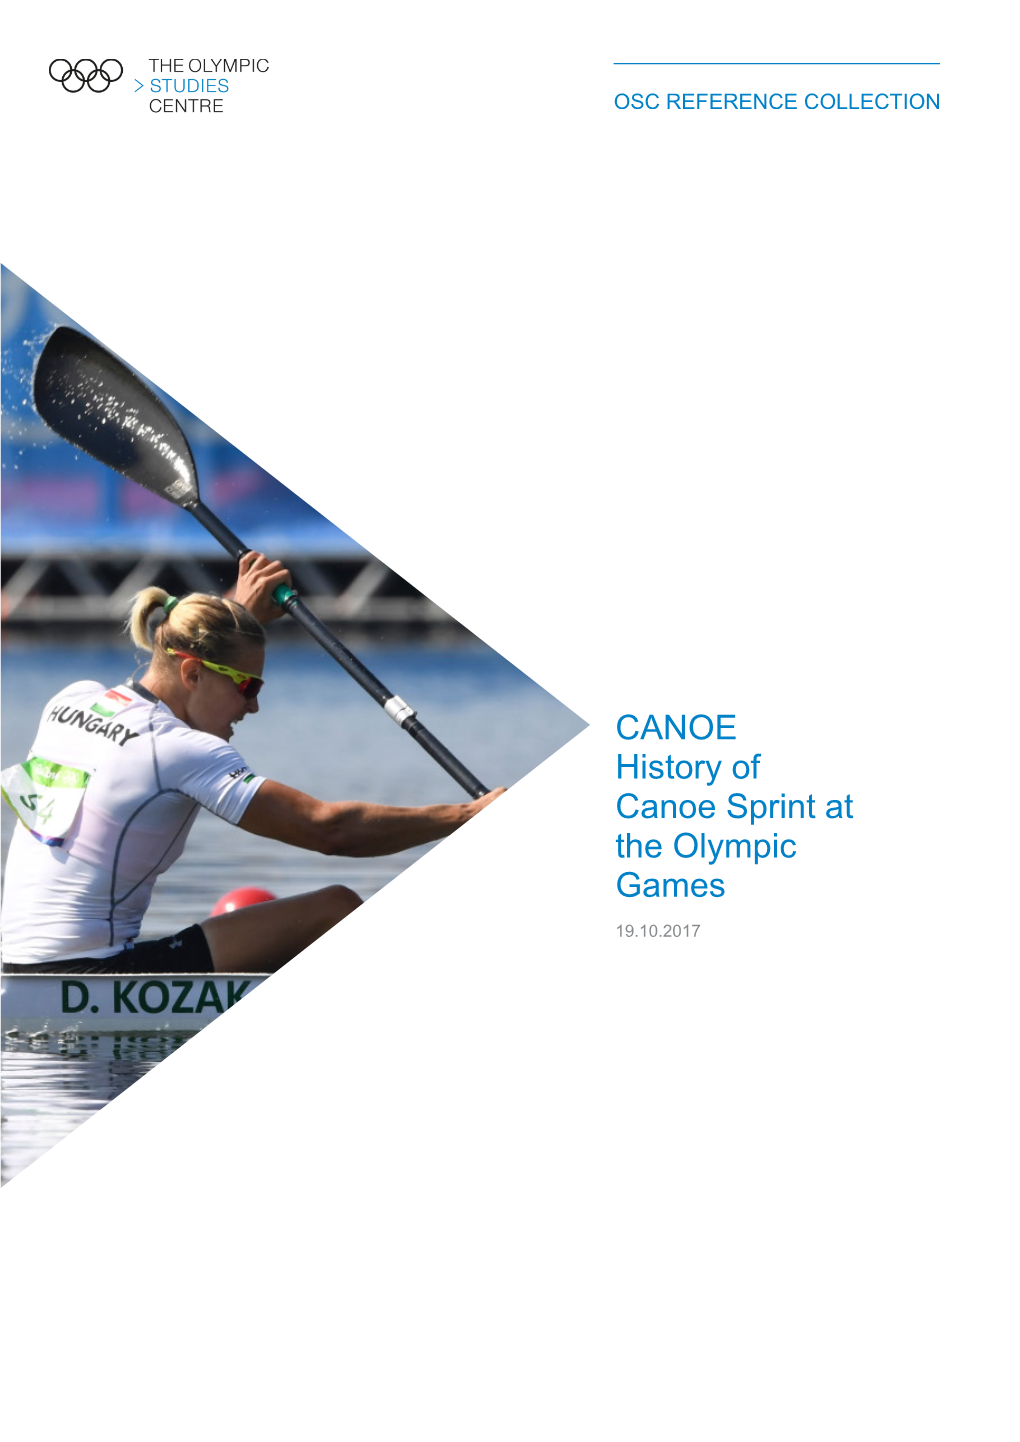 History of Canoe Sprint at the Olympic Games